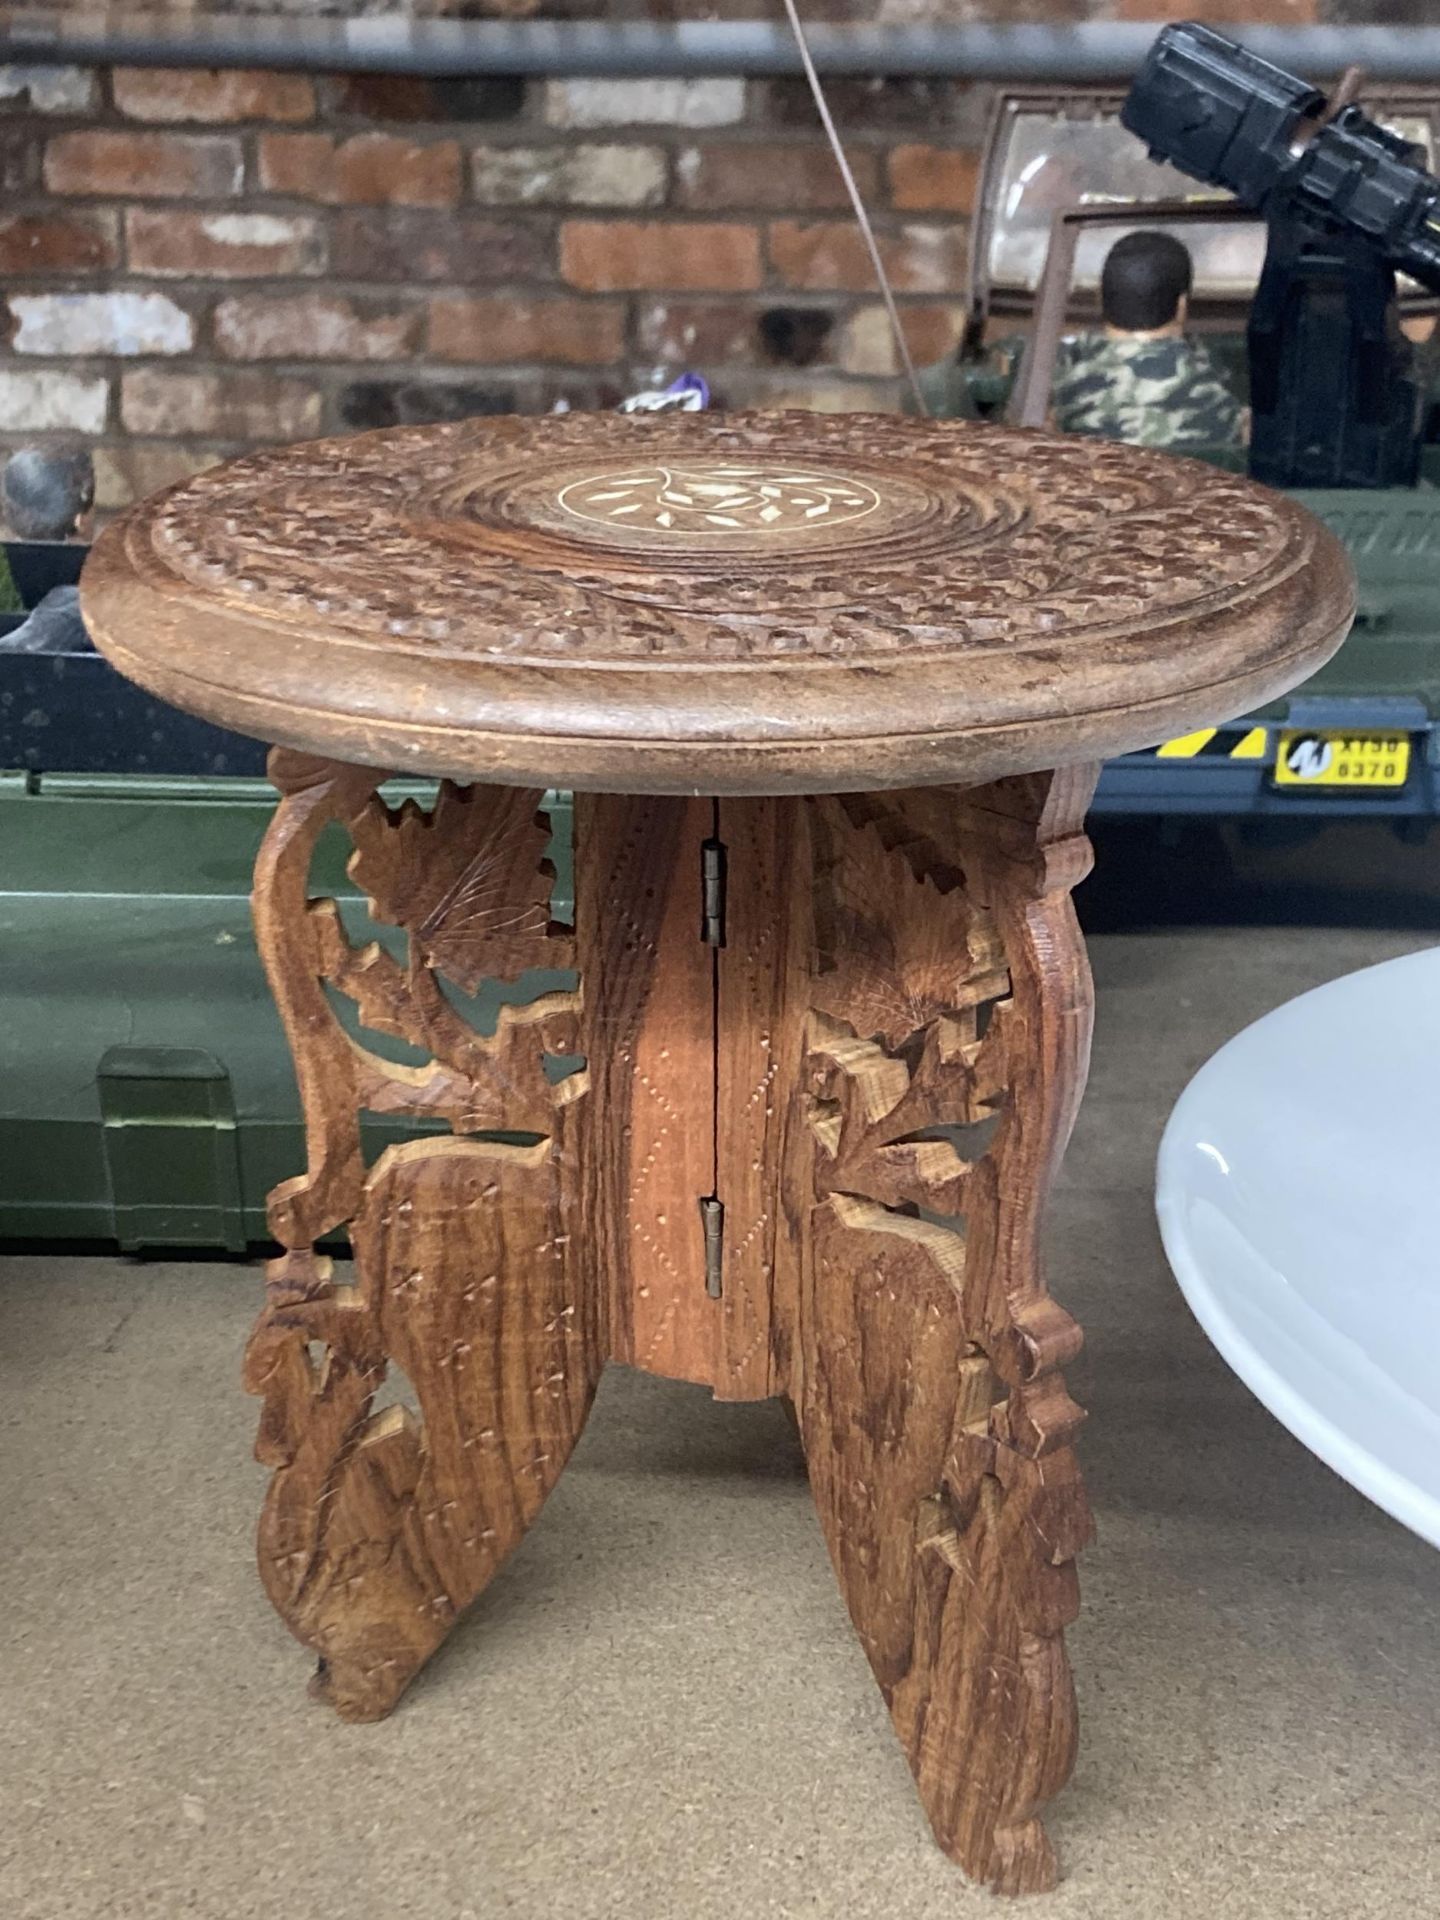 A CARVED INDIAN WOOD TABLE HEIGHT APPROXIMATELY 25CM